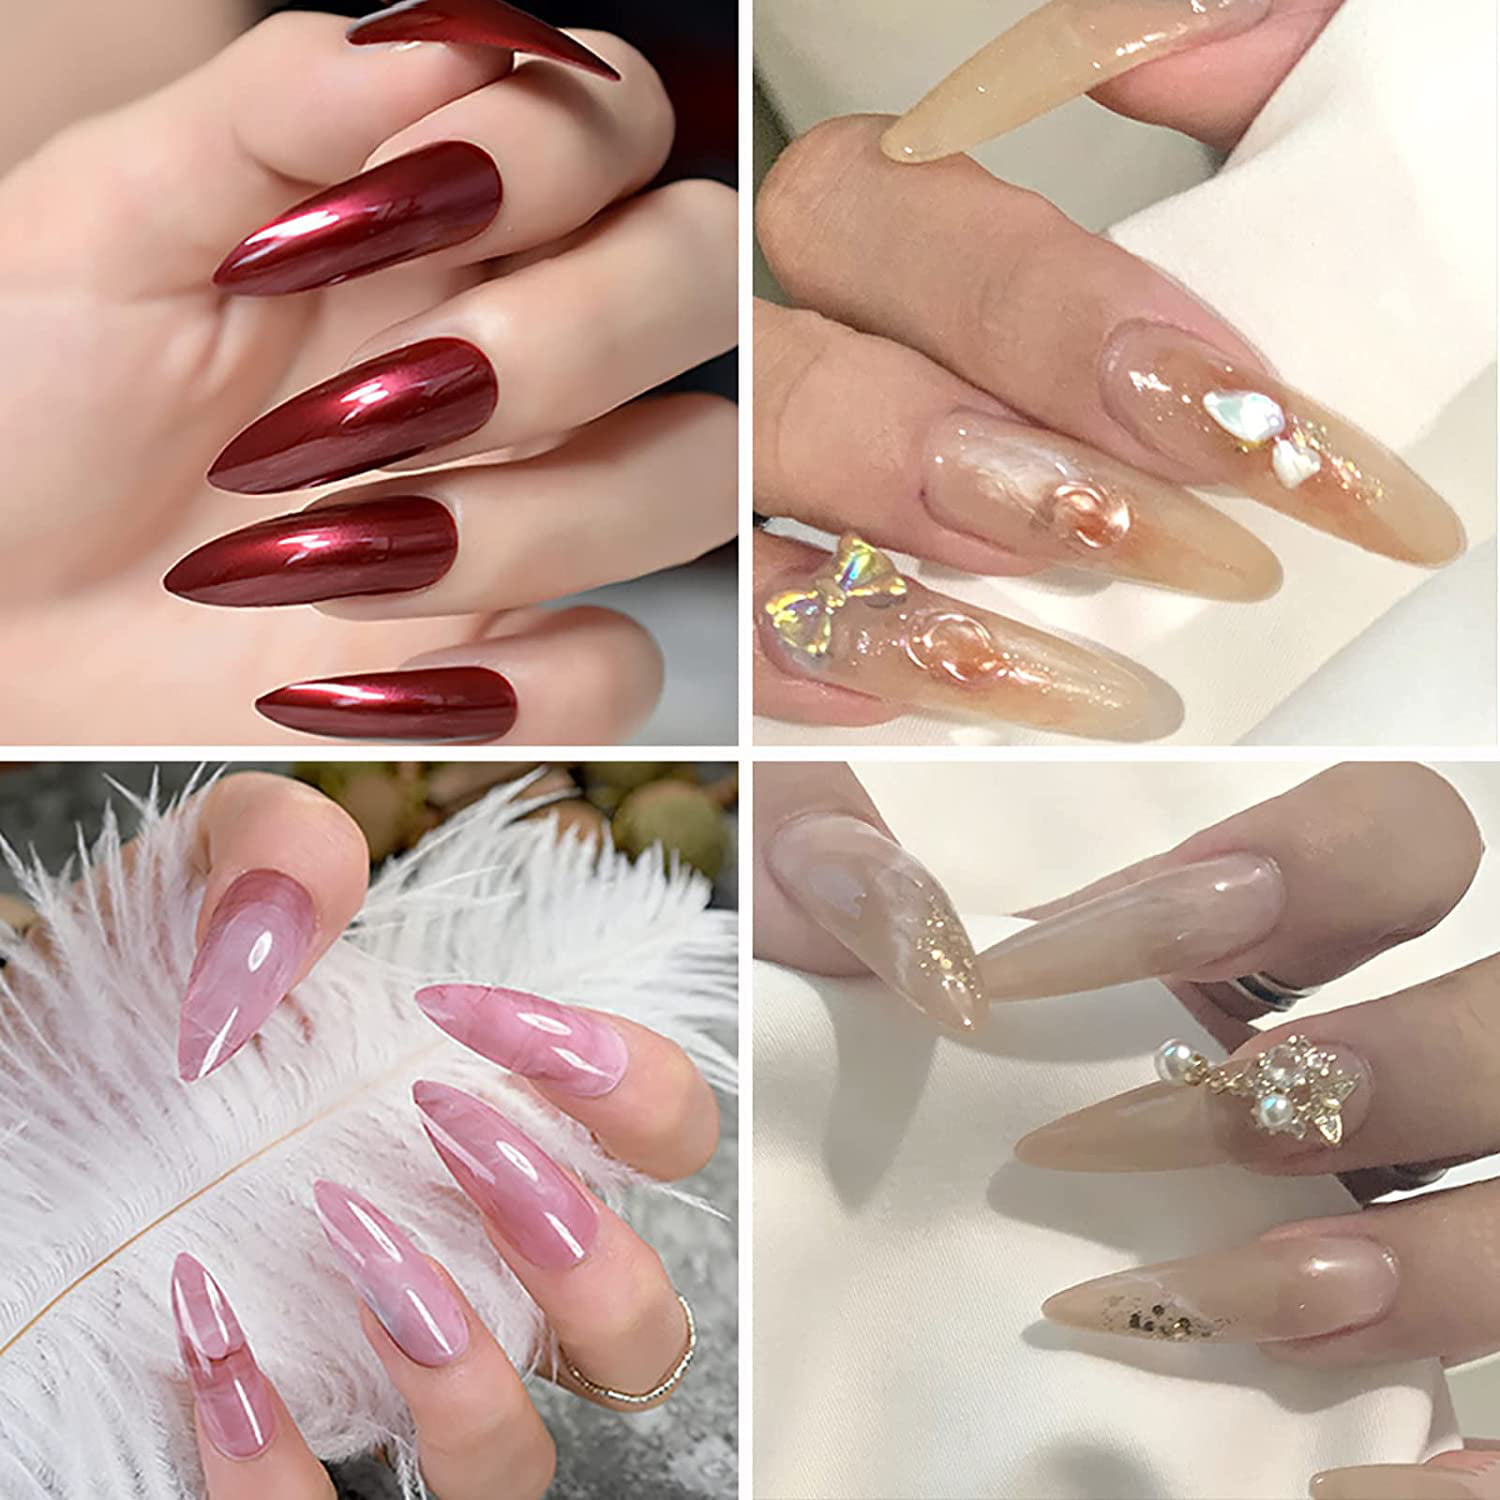 50+ Top New Almond nails design ideas for any season | Almond acrylic nails,  Long almond nails, Almond nails designs